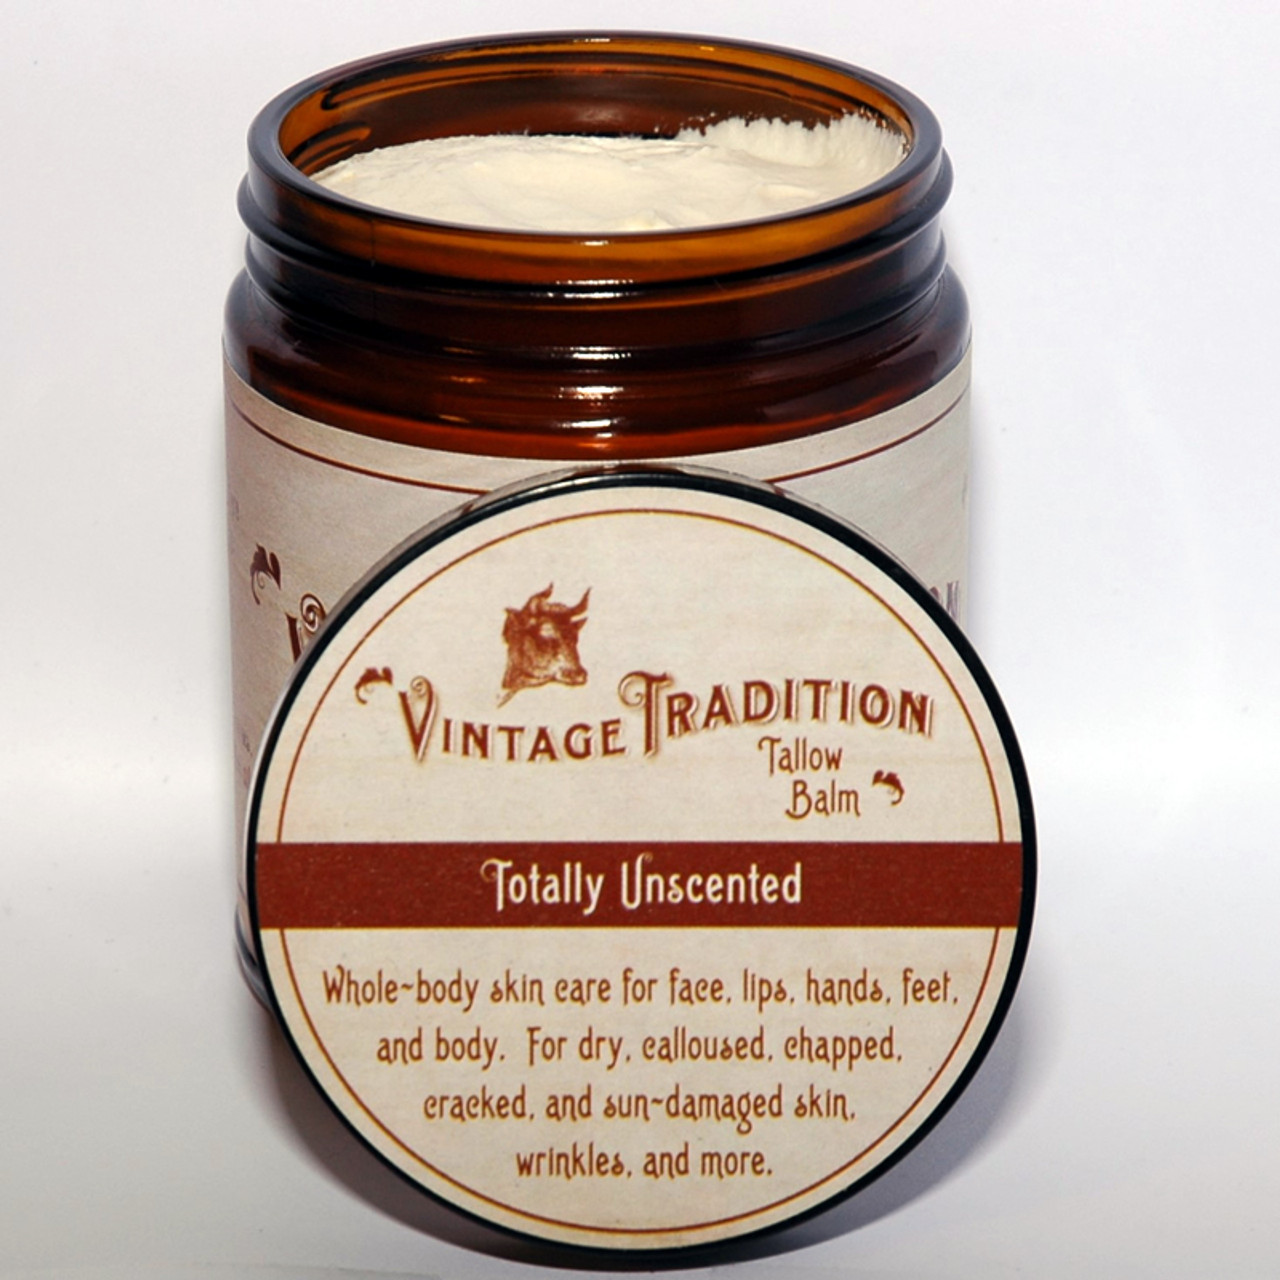 Vintage Tradition Beef Tallow Balm for Skin Care – Unscented, All Purpose  Balm for Sensitive Skin Heals and Hydrates with Olive Oil + Tallow from